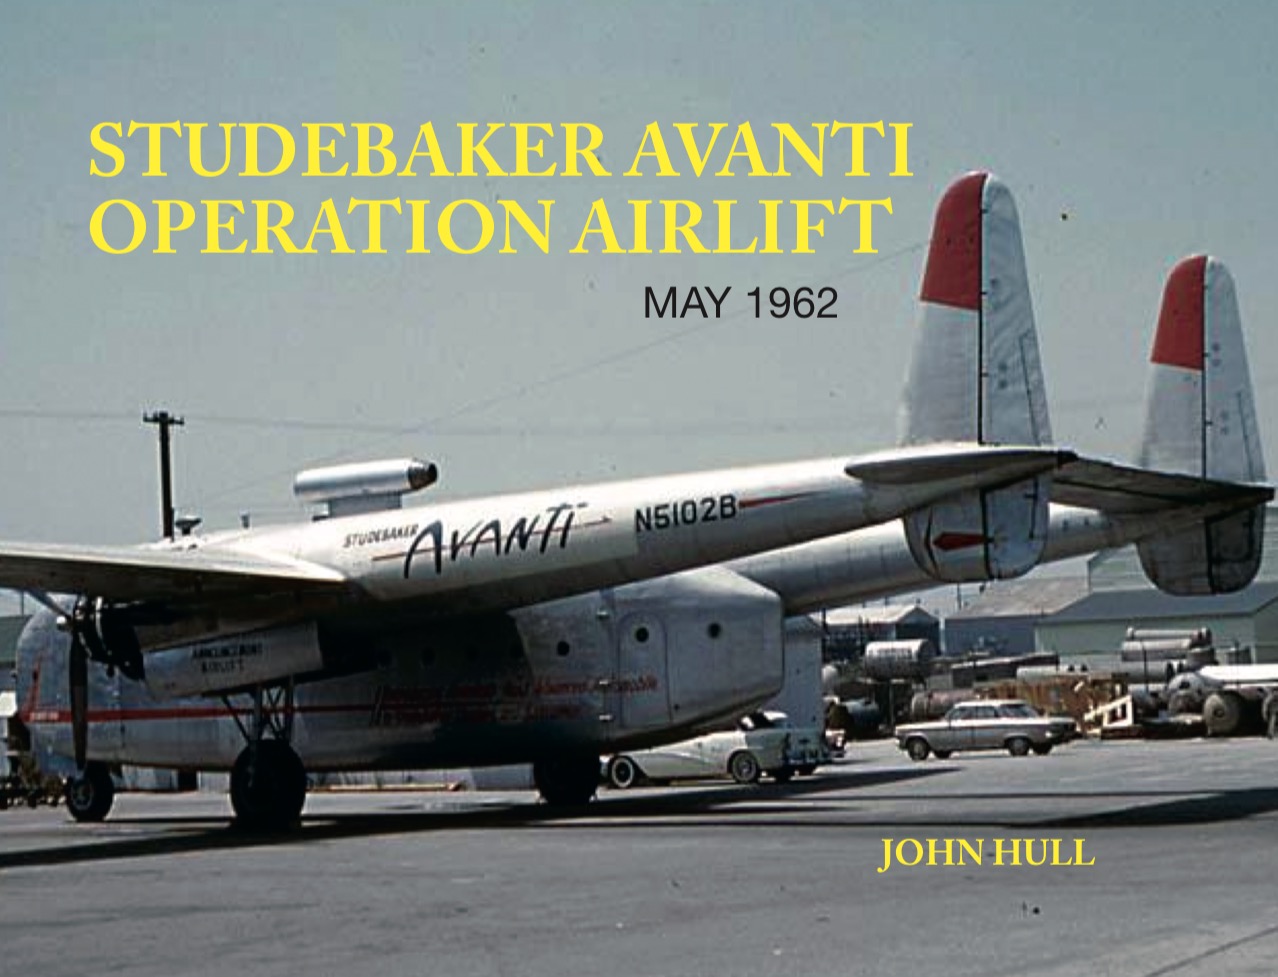 Operation Airlift: May 1962